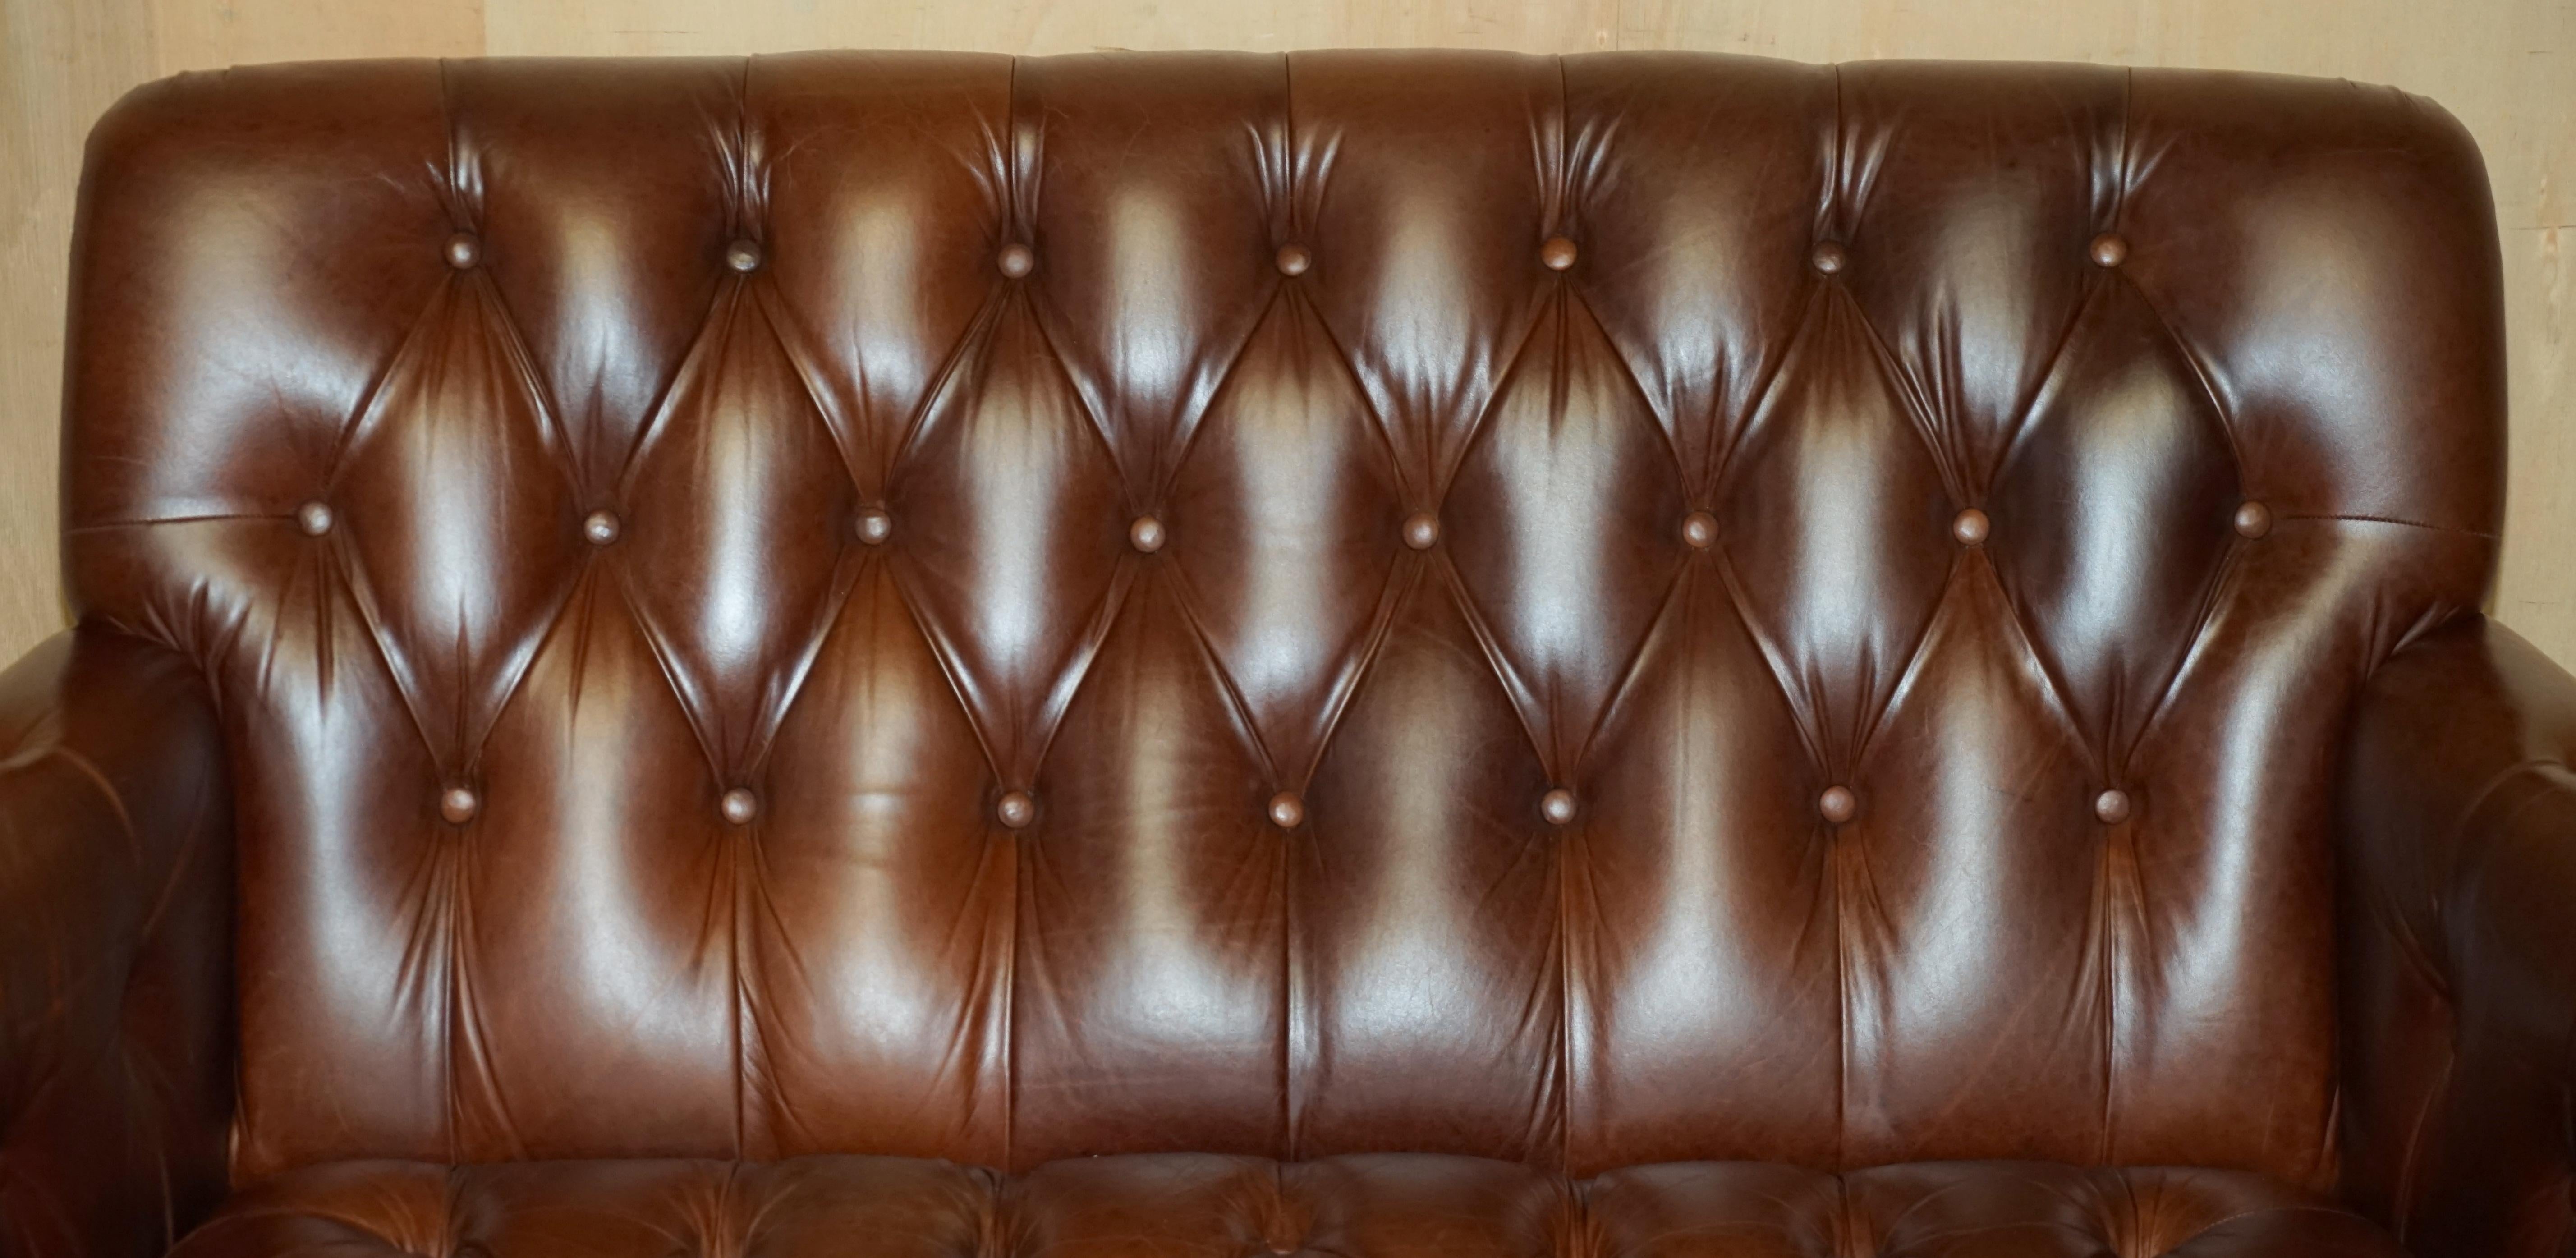 FiNE CHESTNUT BROWN LEATHER LAUREN ASHLEY CHESTERFIELD TWO SEAT LIBRARY SOFa (Chesterfield) im Angebot